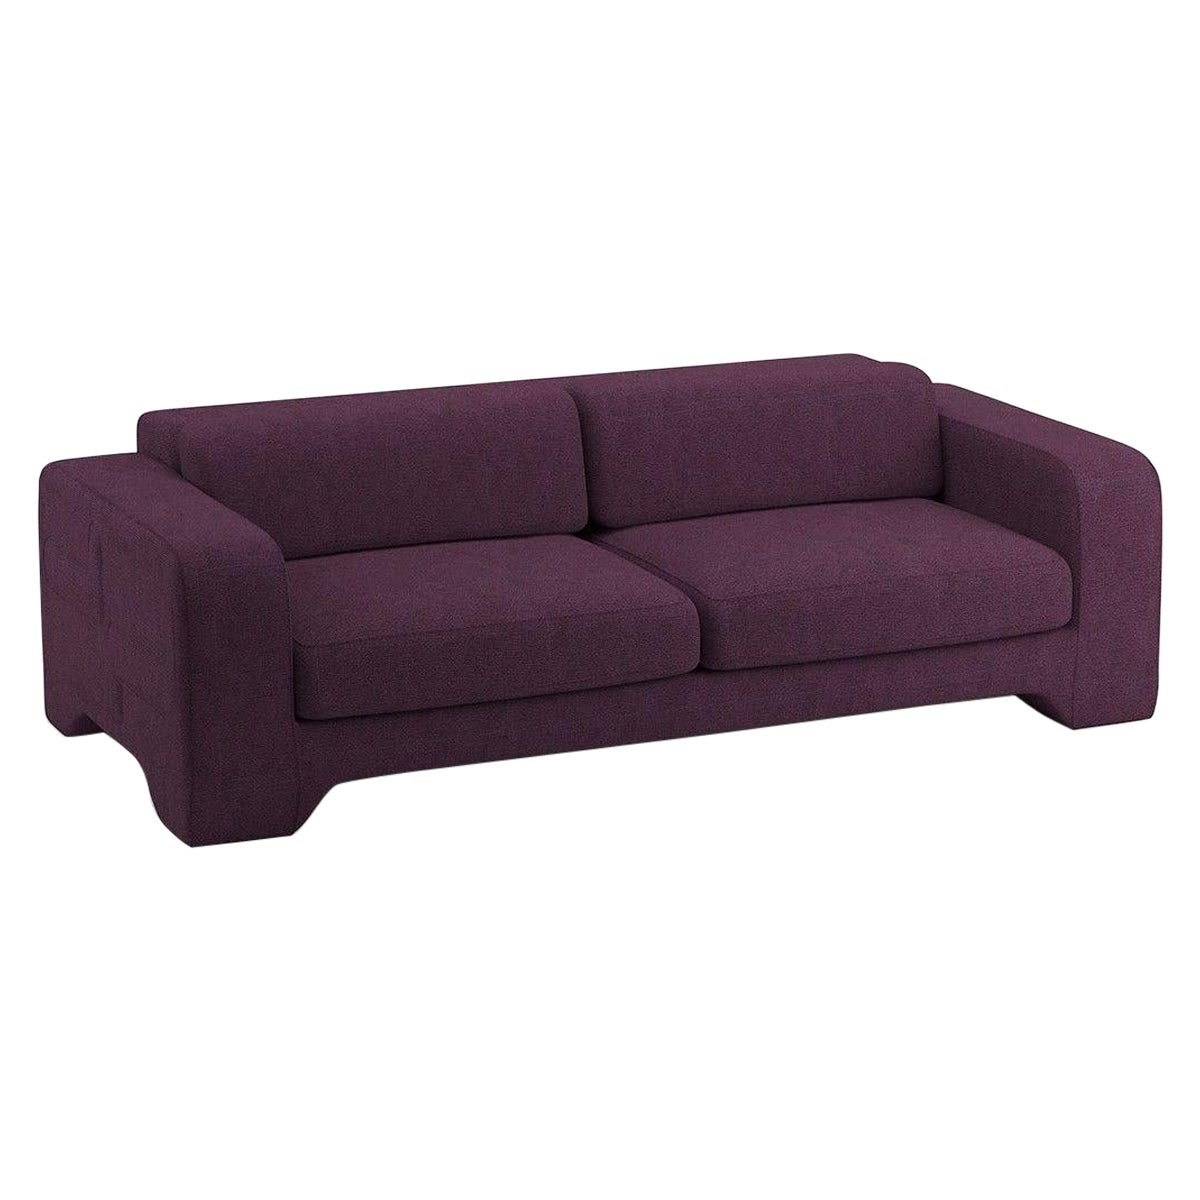 Popus Editions Giovanna 3 Seater Sofa in Eggplant Megeve Fabric Knit Effect For Sale